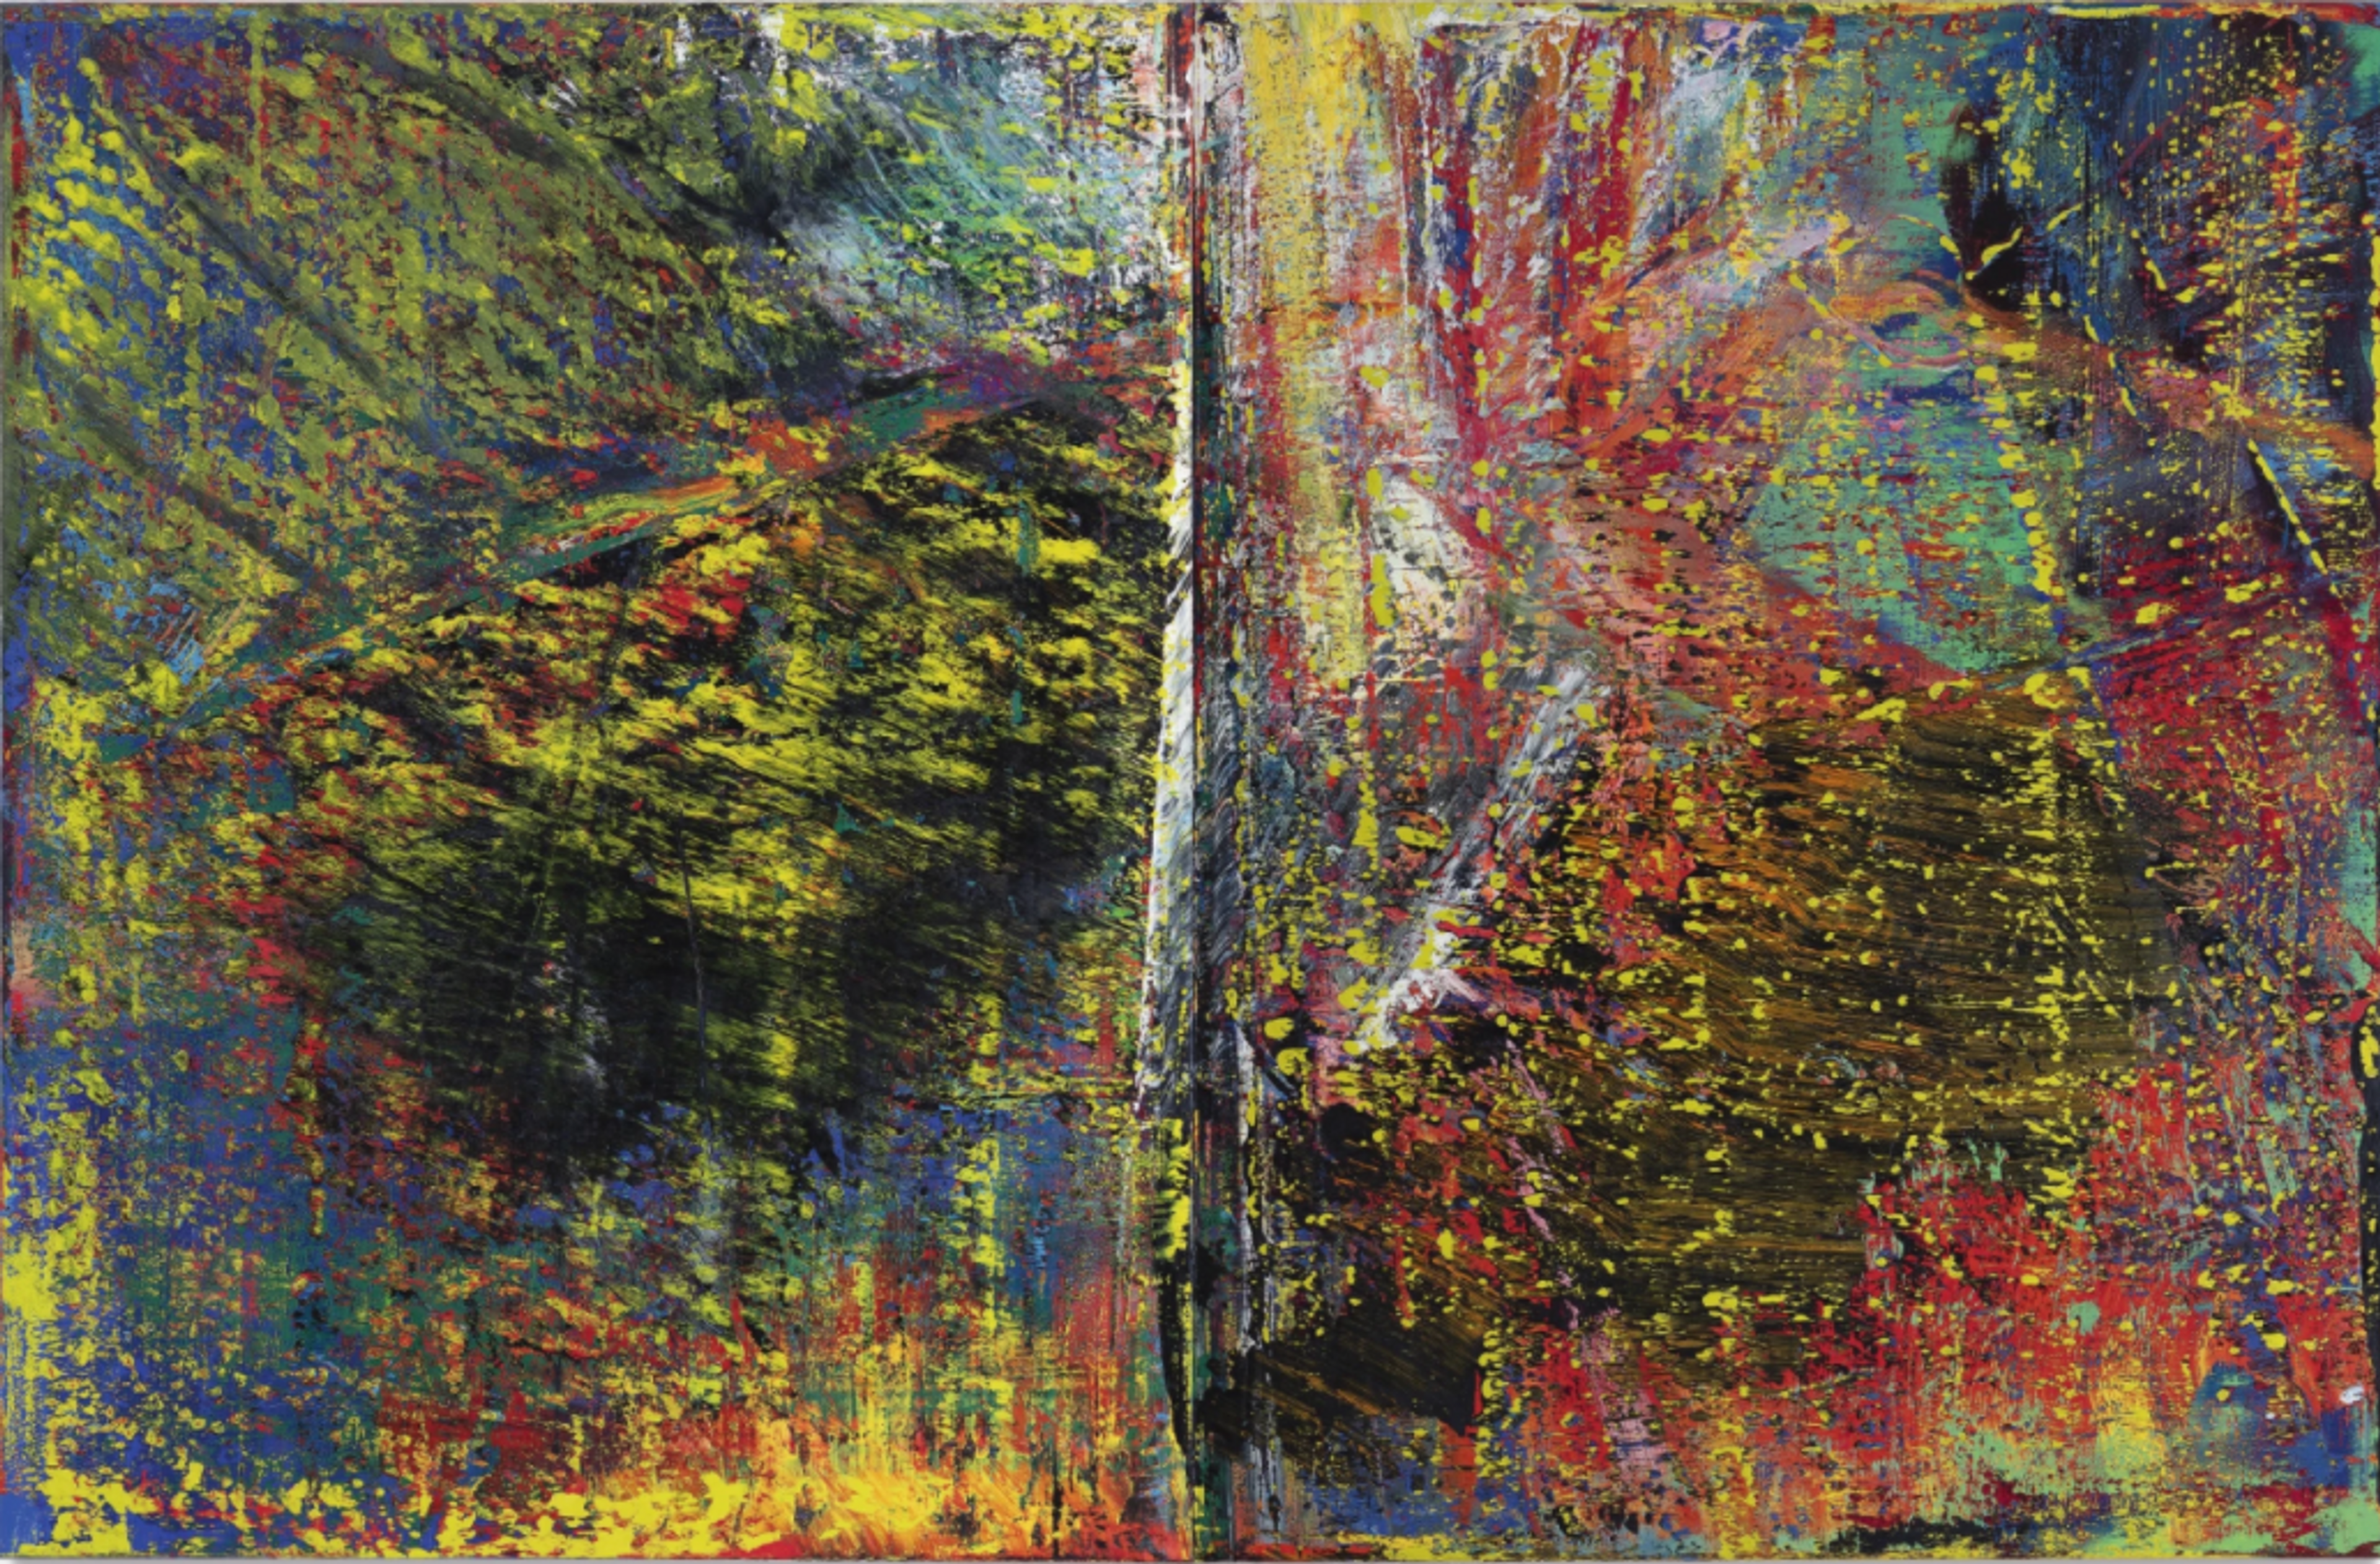 Painting by Gerhard Richter covering two panels, featuring abstract forms in red, yellow, black, blue, and white, which trace the artist's movement in the production of the artwork.